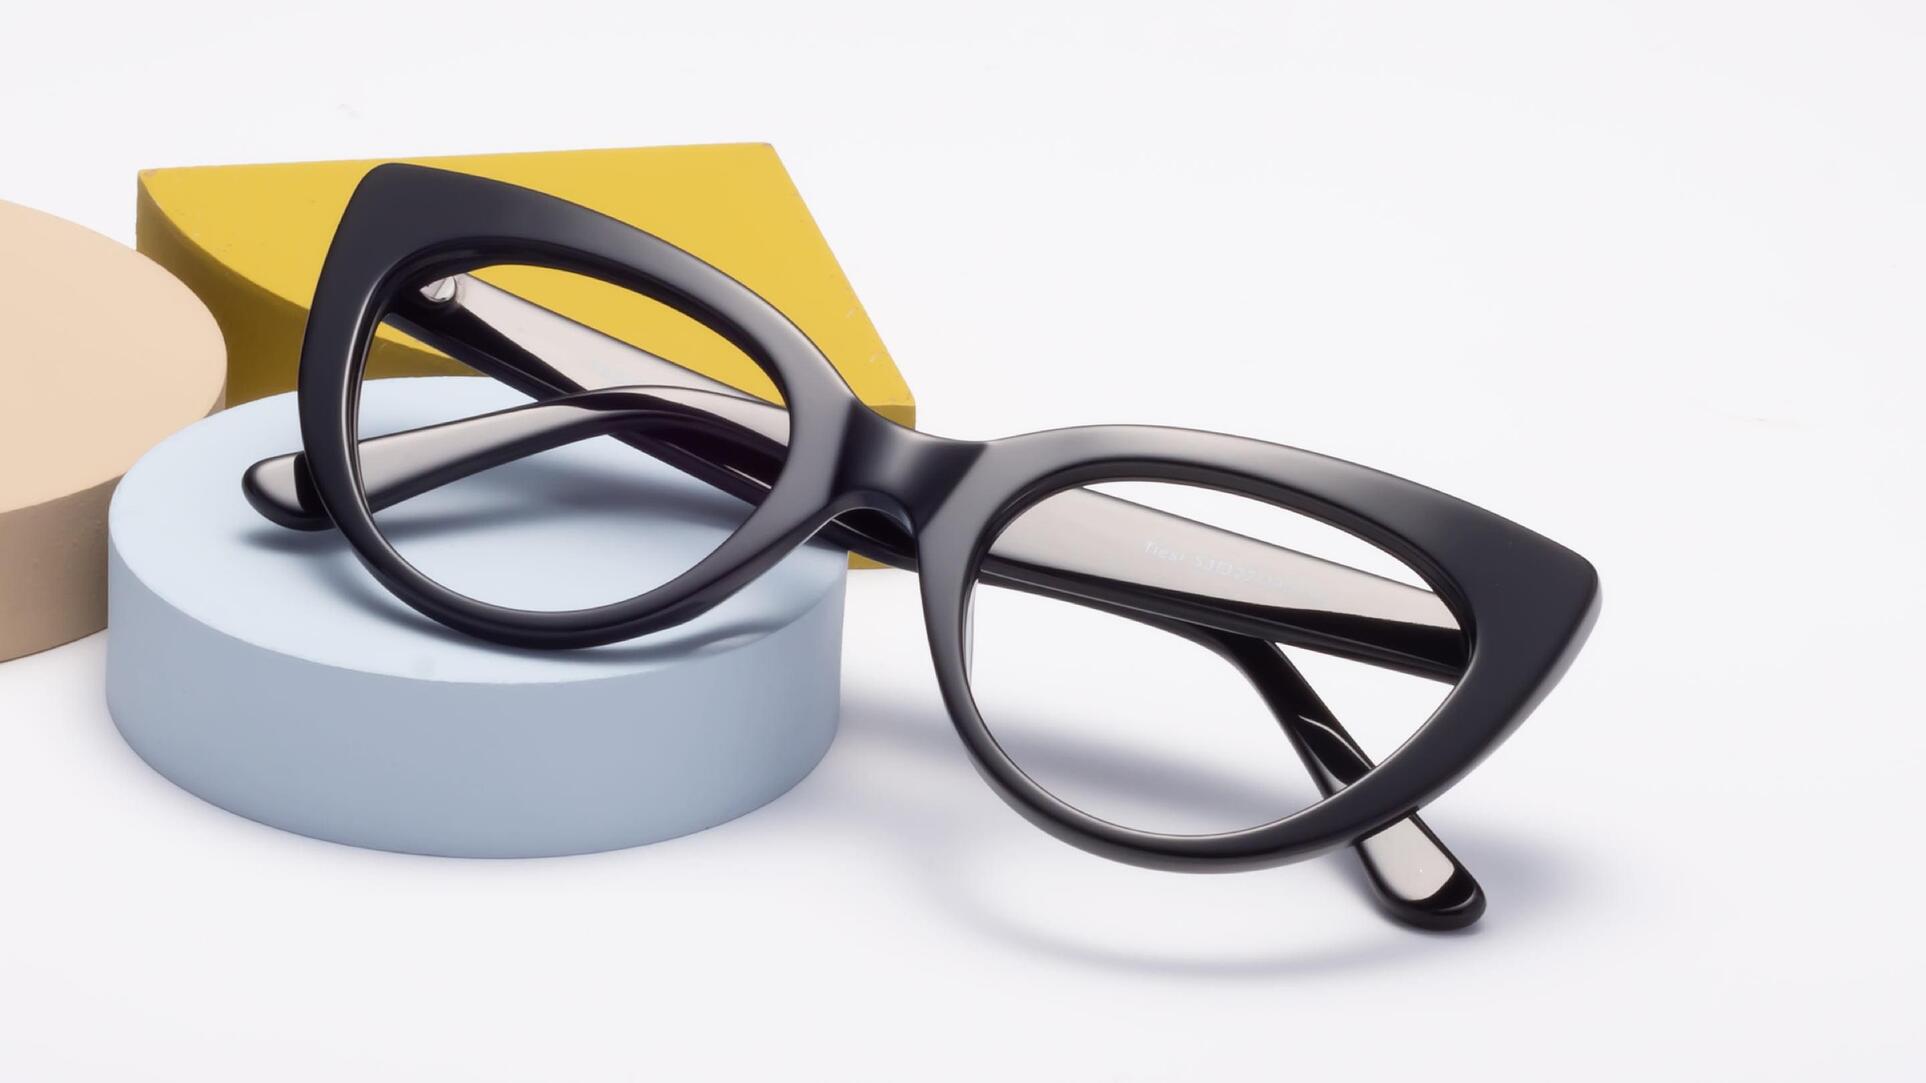 Plastic frames offer more color and shape options, giving you a huge selection to choose from